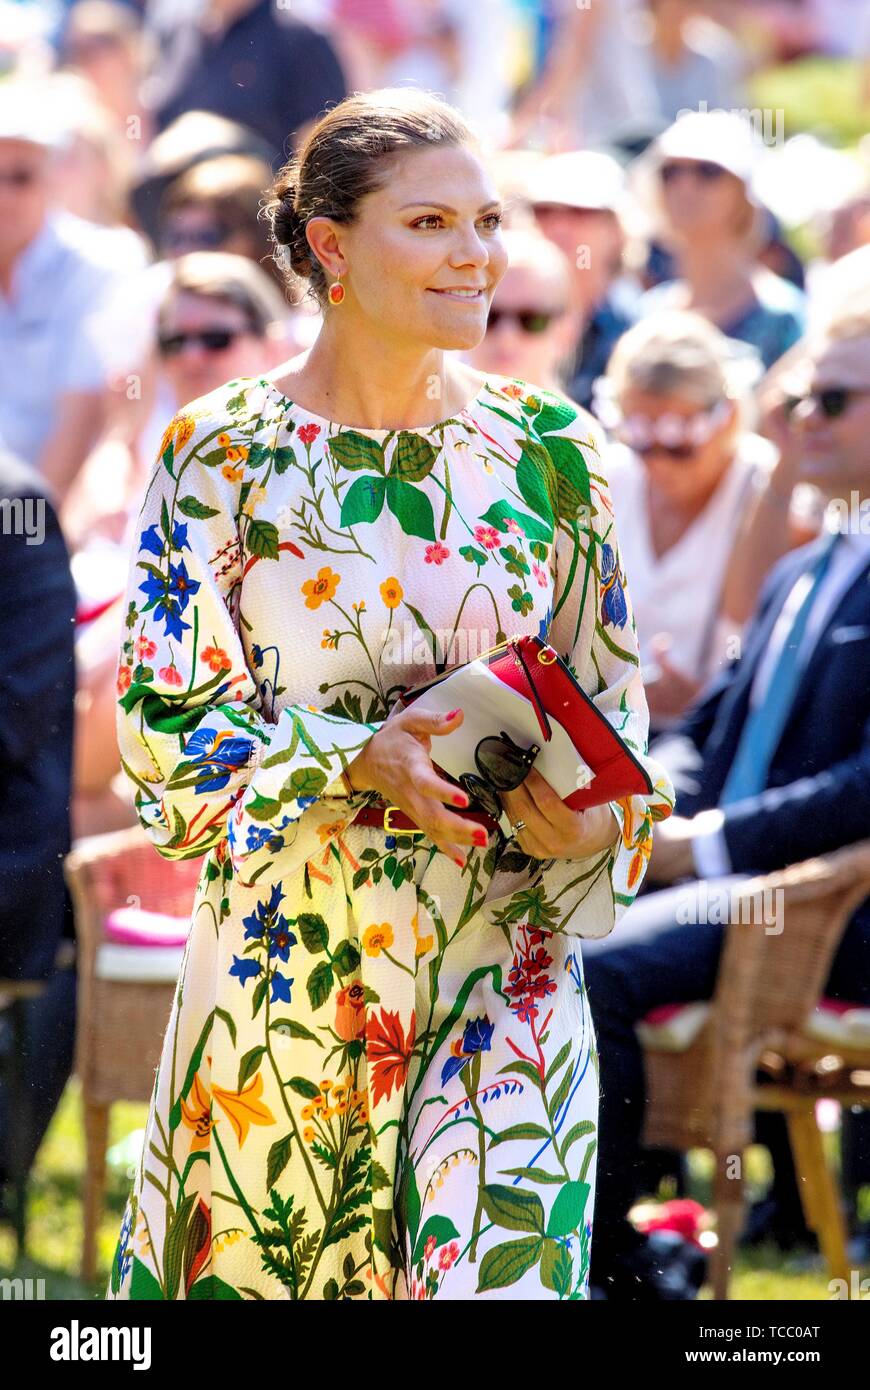 Solna, Sweden. 06th June, 2019. Crown Princess Victoria of Sweden at Hagaparken in Solna Municipality just north of Stockholm, on June 06, 2019, on the occasion of the National Day of Sweden Credit: Albert Nieboer/Netherlands OUT/Point De Vue OUT |/dpa/Alamy Live News Stock Photo